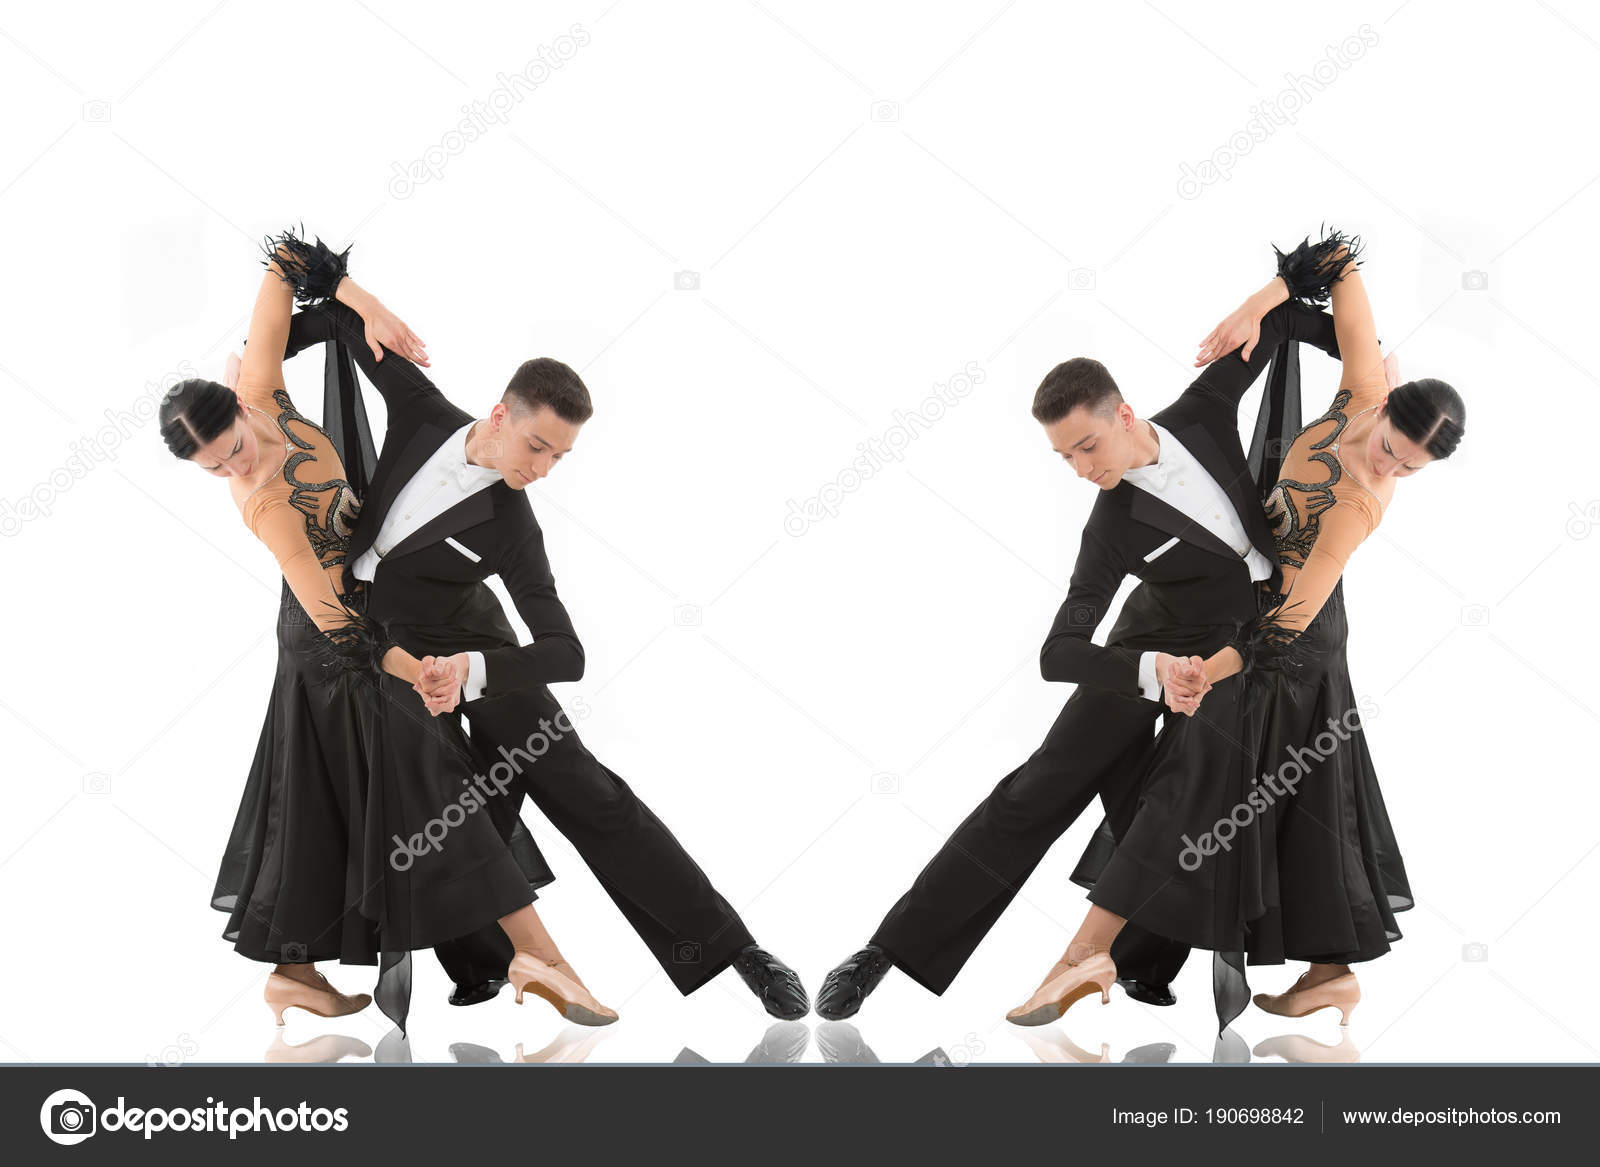 Male ballet dance poses Stock Photos - Page 1 : Masterfile